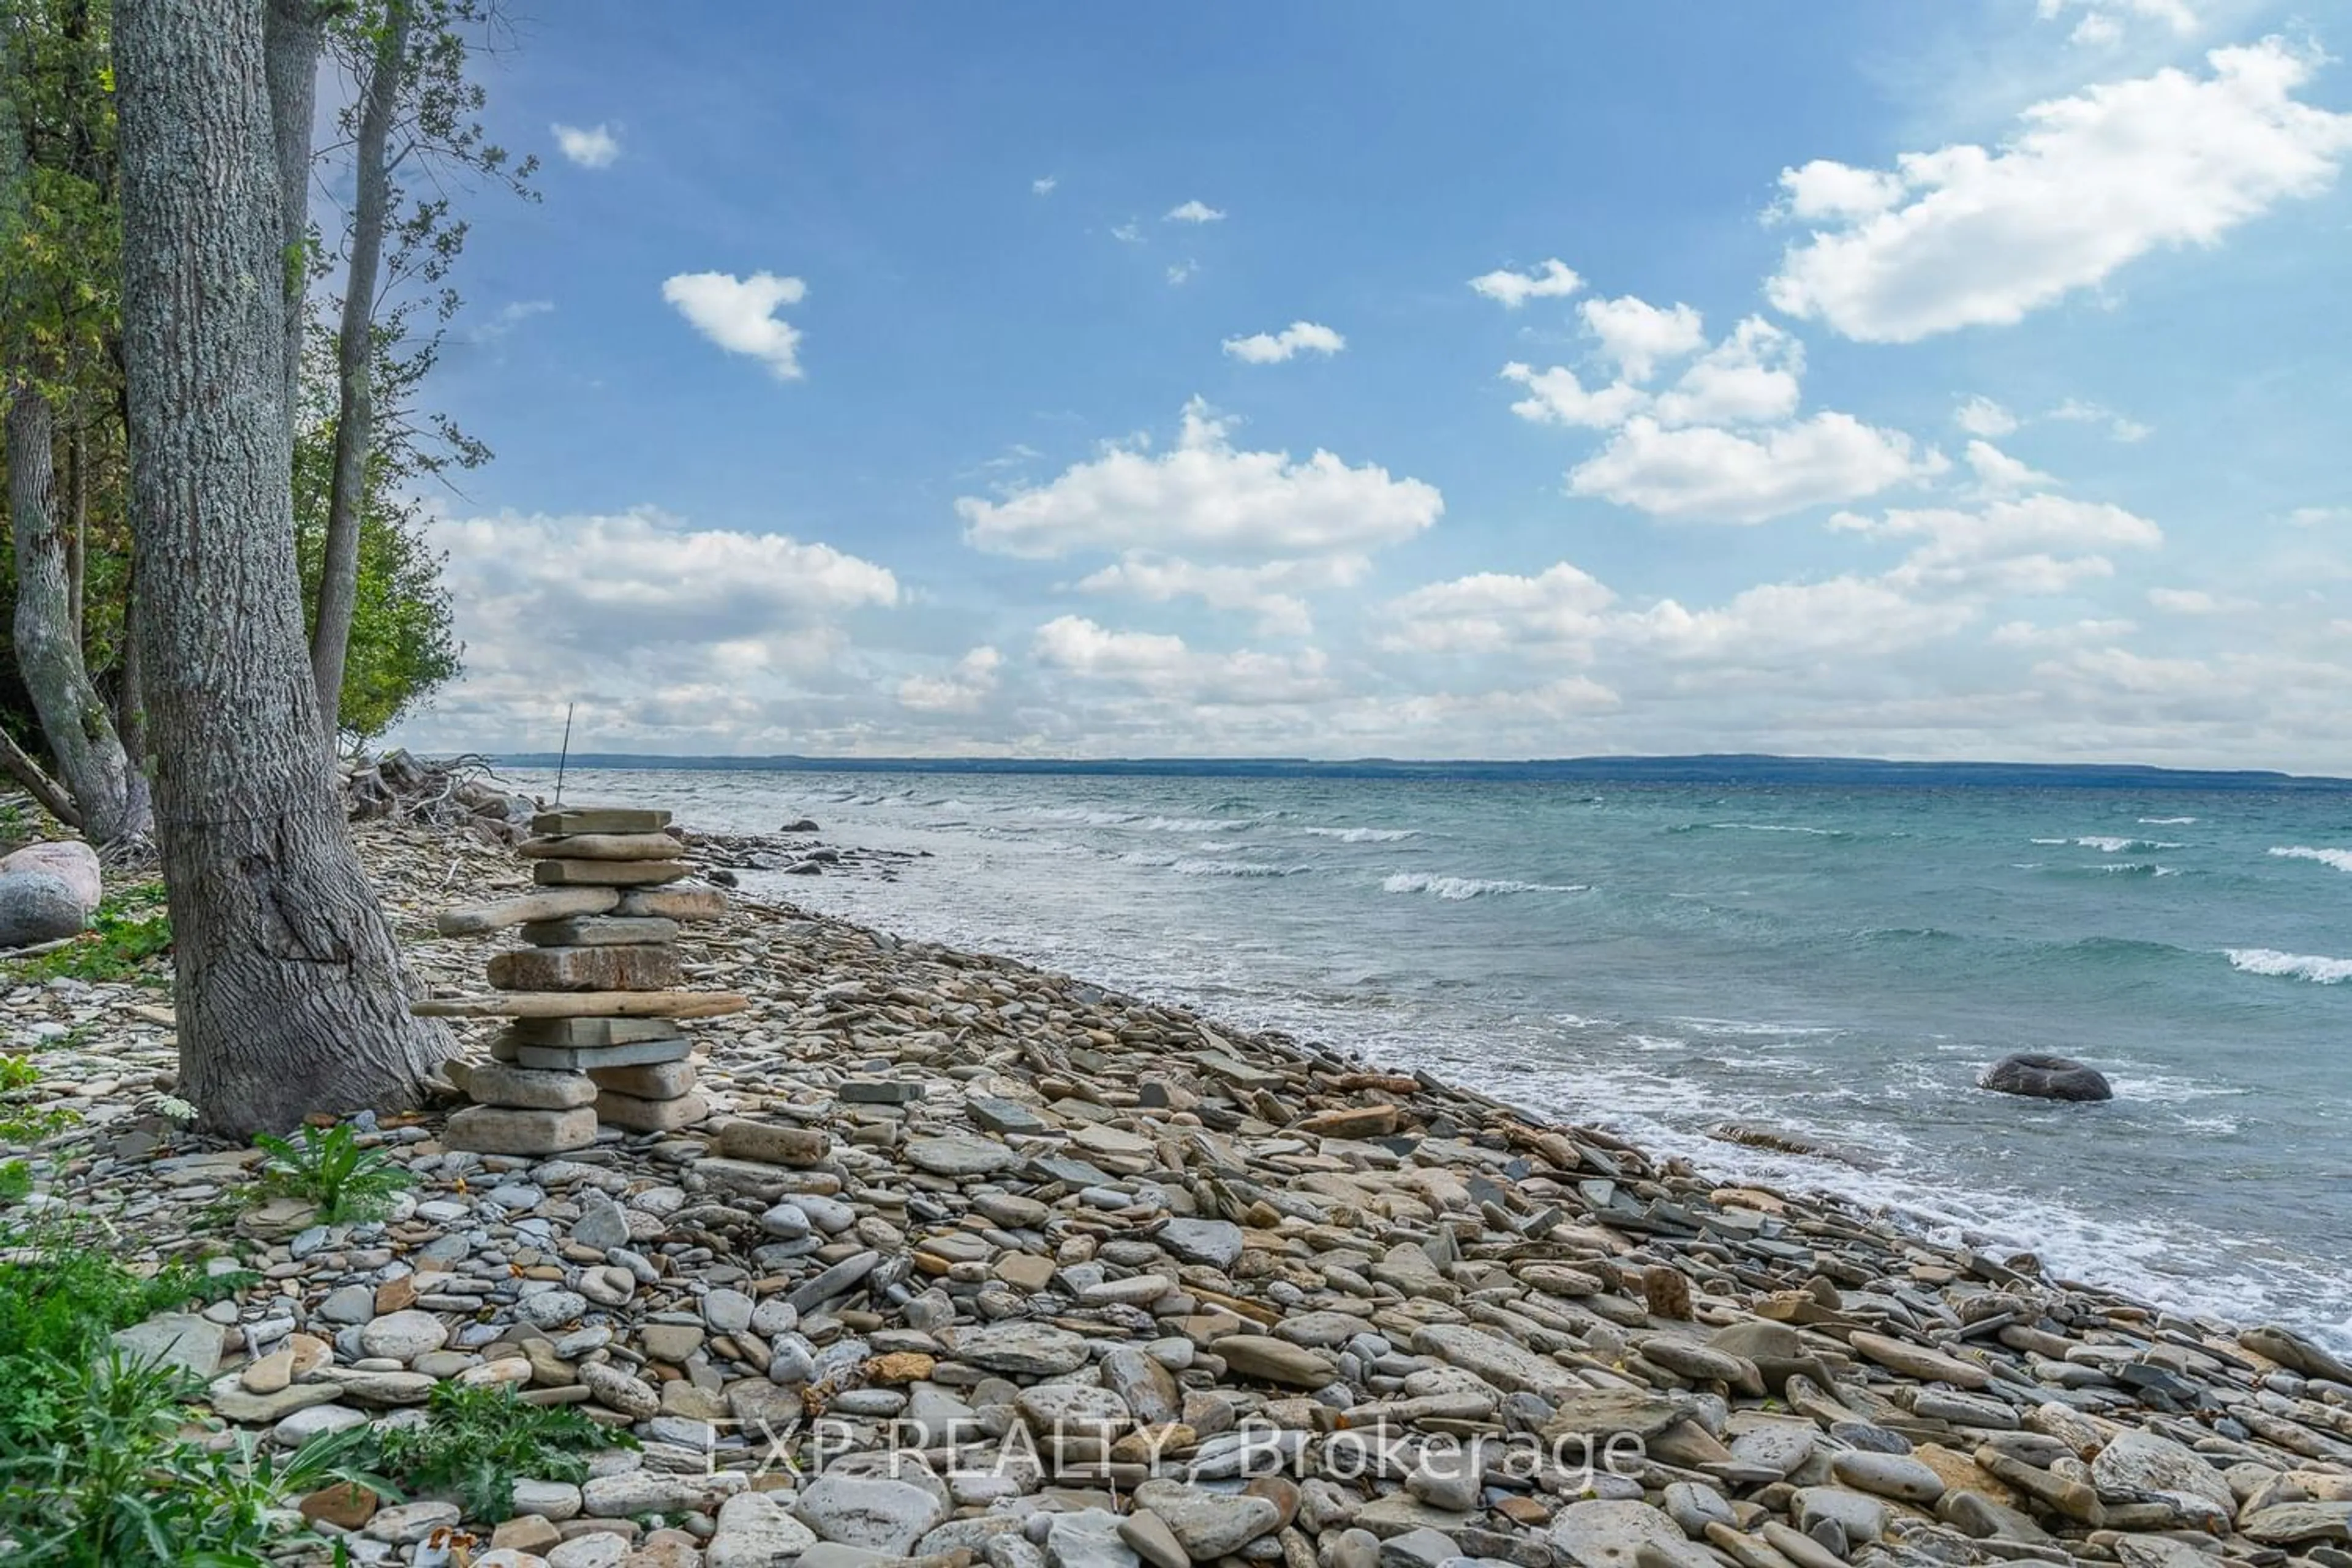 Lakeview for 168 Queens Bush Dr, Meaford Ontario N0H 1B0